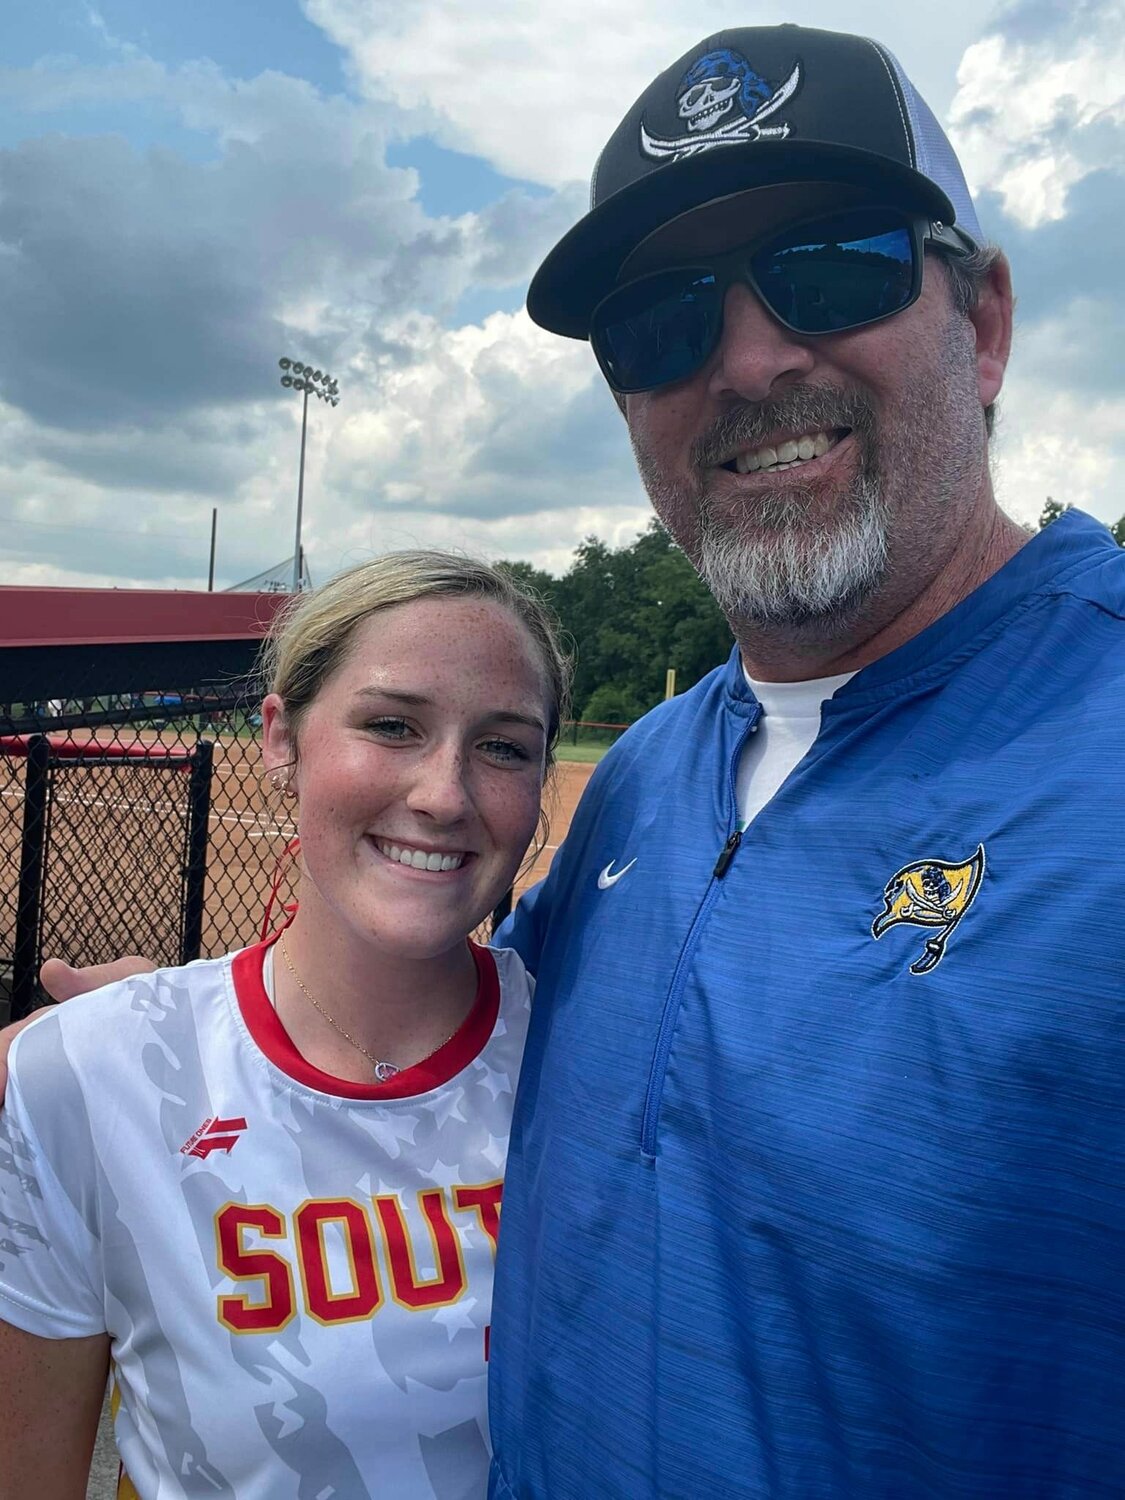 Fairhope head softball coach Trevor Powell caught up with Jesslyn Gordon after the AHSAA North-South softball classic on Wednesday, July 19, at Lagoon Park in Montgomery. Gordon was one of three softball players from Baldwin County named to the South All-Star roster.